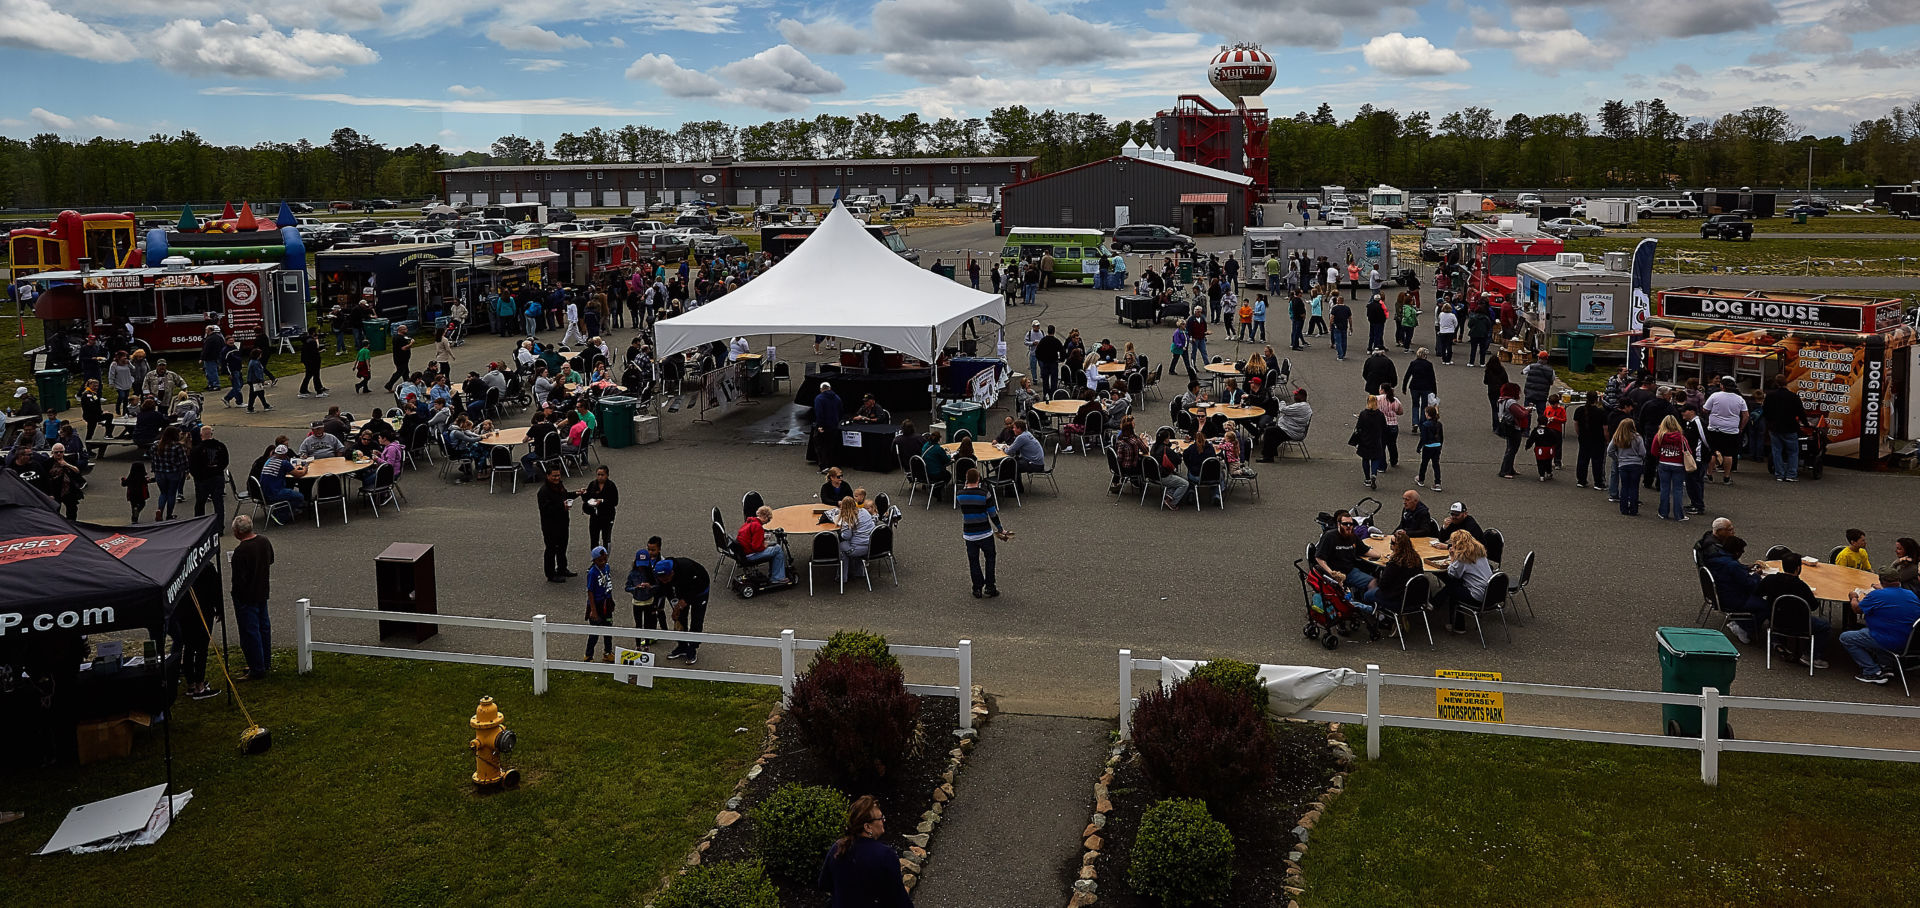 New Jersey Motorsports Park (NJMP) is hosting its 5th Annual Food Truck Festival on Saturday, June 12. Photo courtesy NJMP.